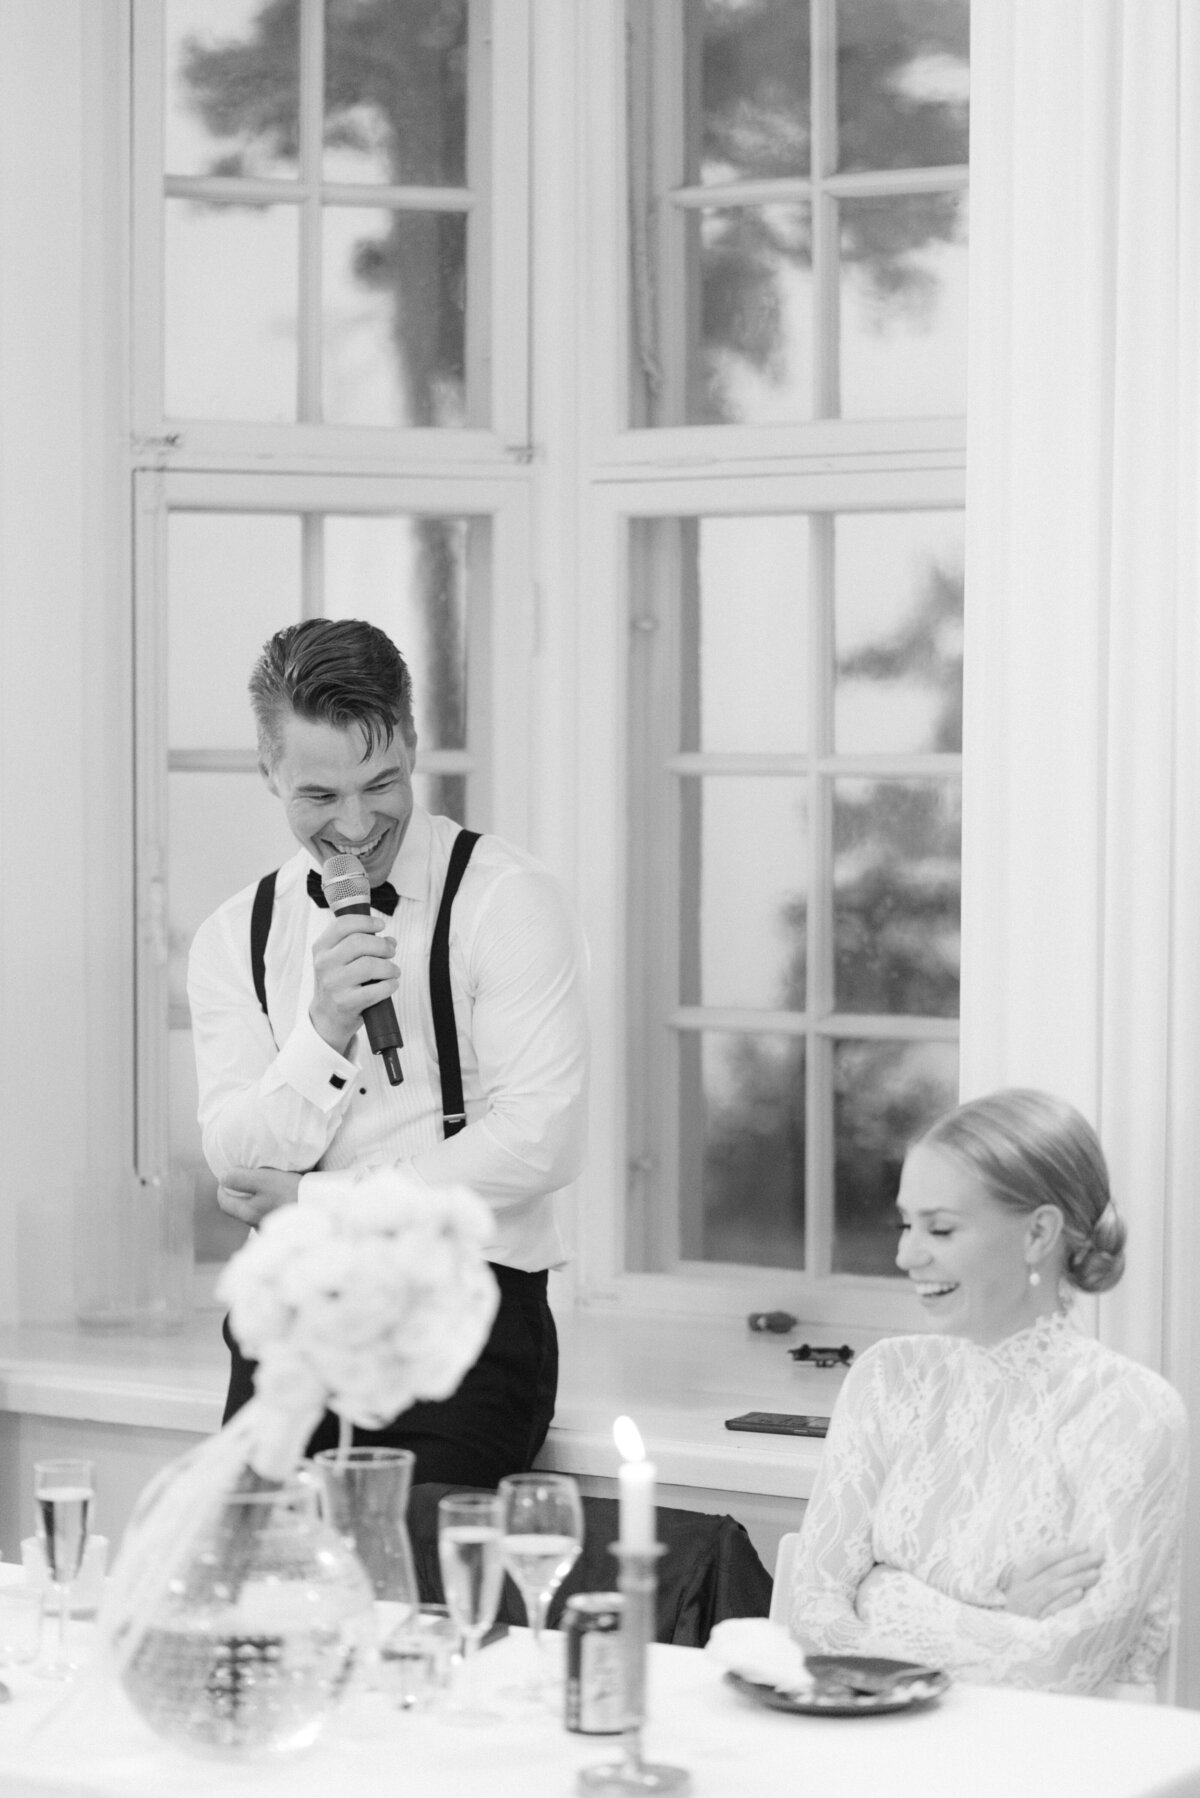 Documentary wedding photograph of the groomg  giving a speech to the bride in Airisniemi manor in Turku, Finland. Atmosphere captured by wedding photographer Hannika Gabrielsson.